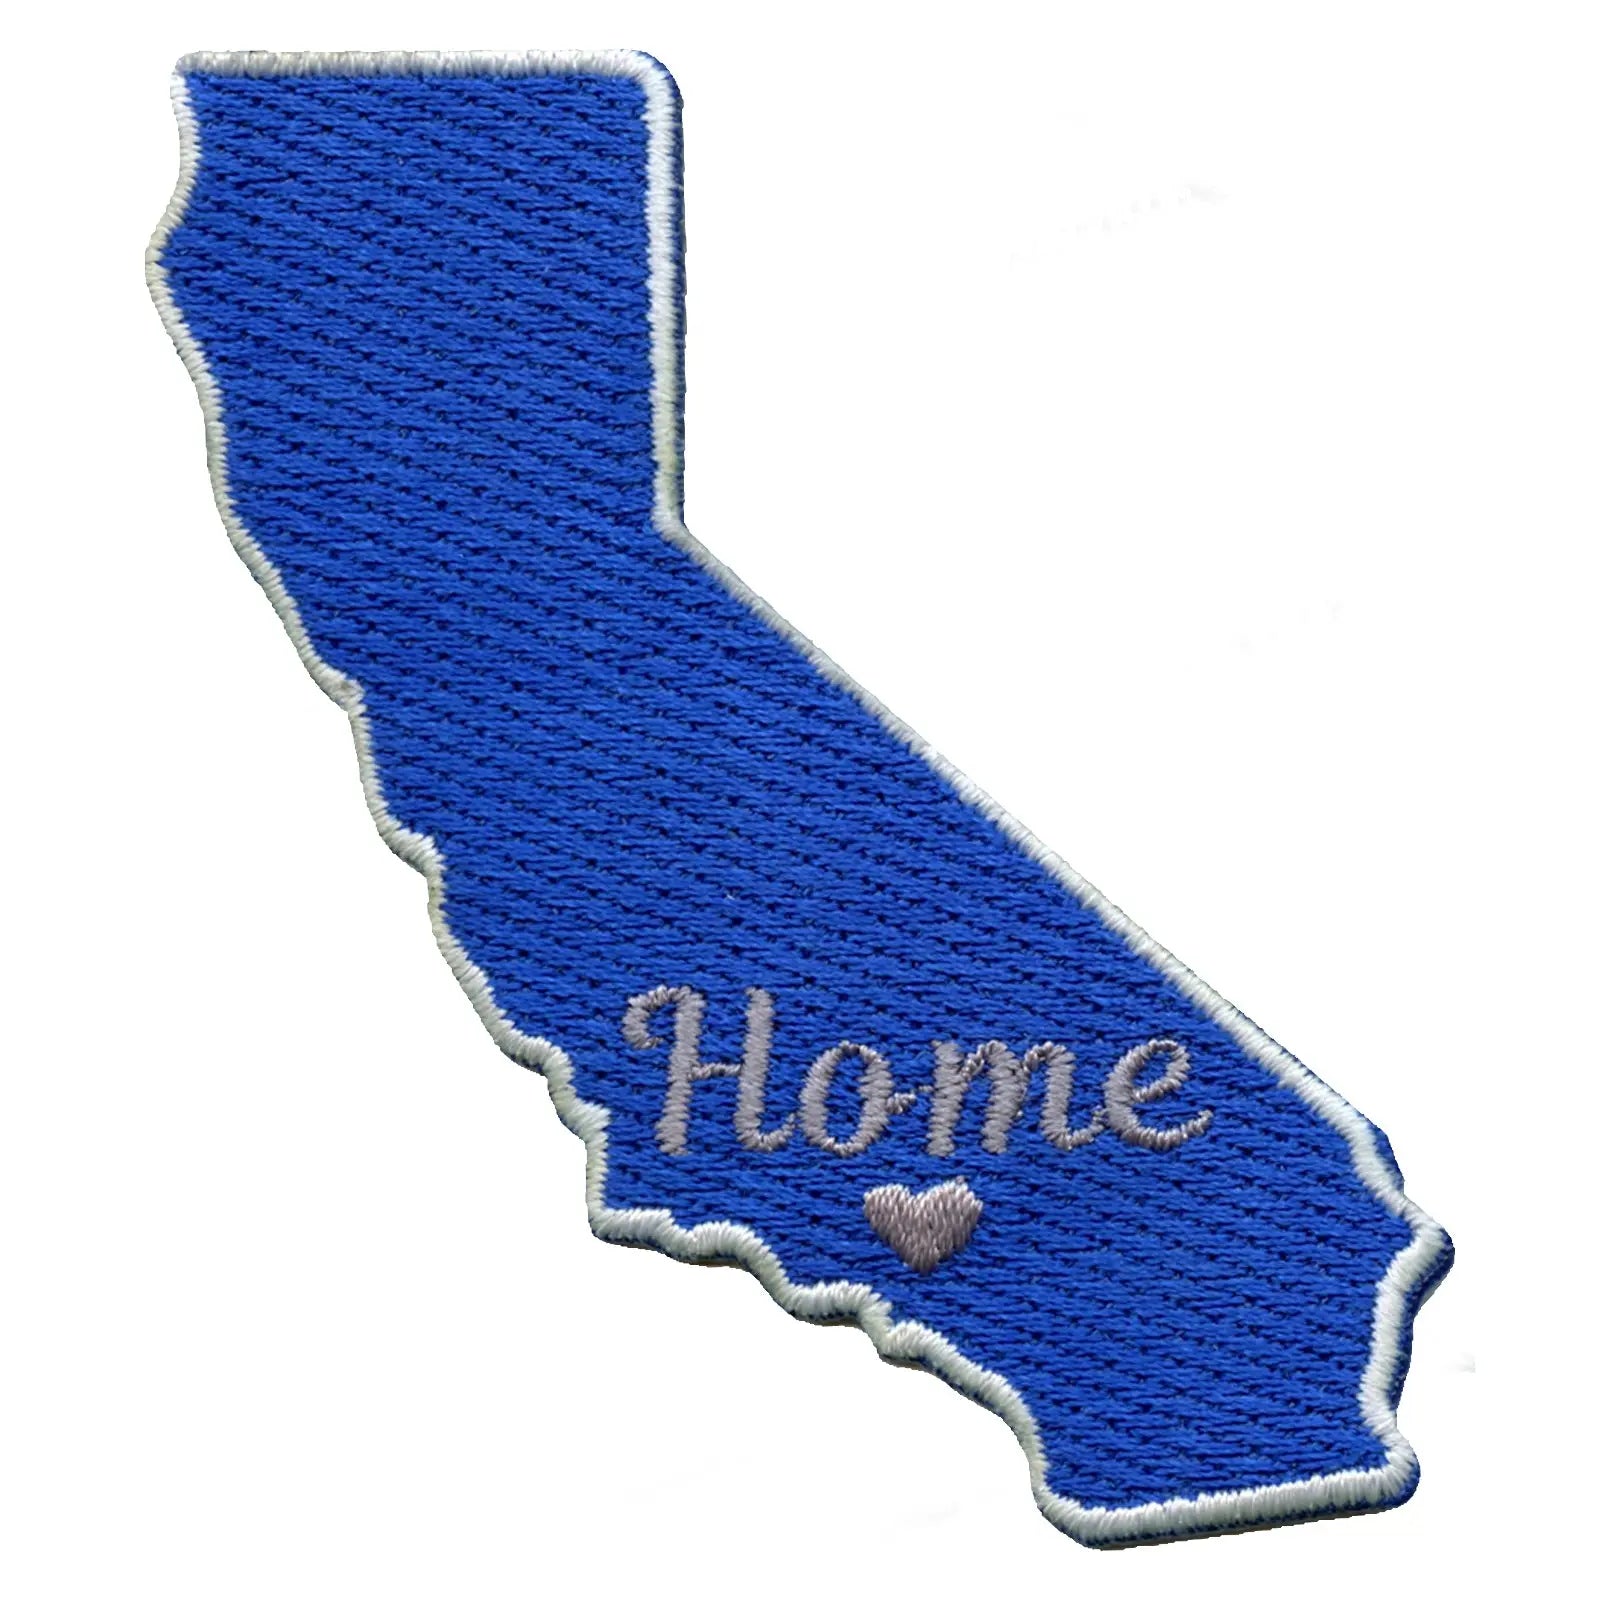 California Home State Los Angeles Baseball Parody Embroidered Iron On Patch 